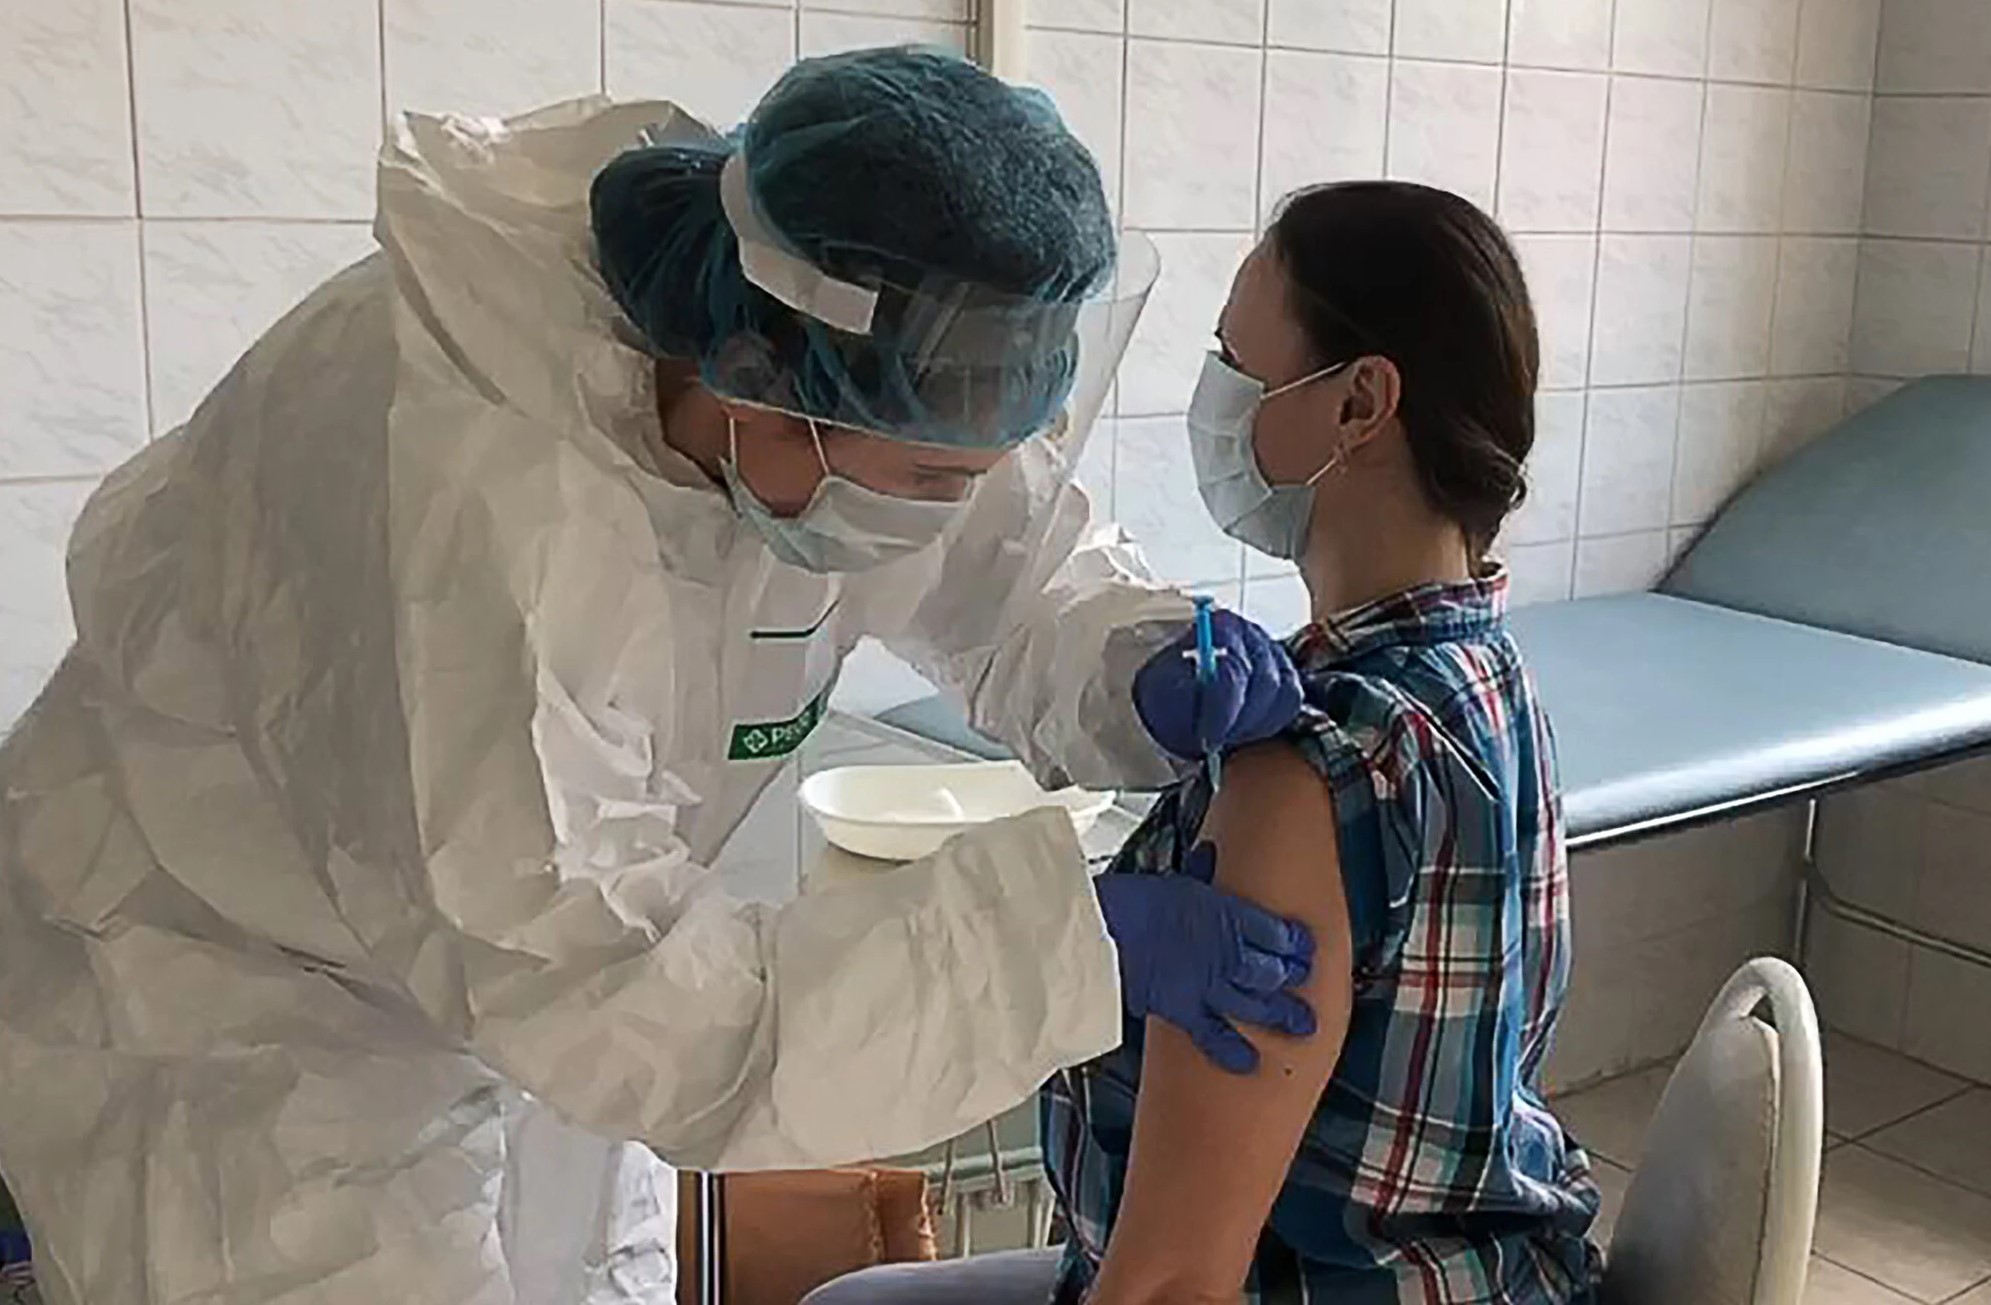 A volunteer received a coronavirus vaccine as part of clinical trials at Sechenov First Moscow State Medical University in June. (Image by Sechenov Medical University Press Office, via Getty Images)